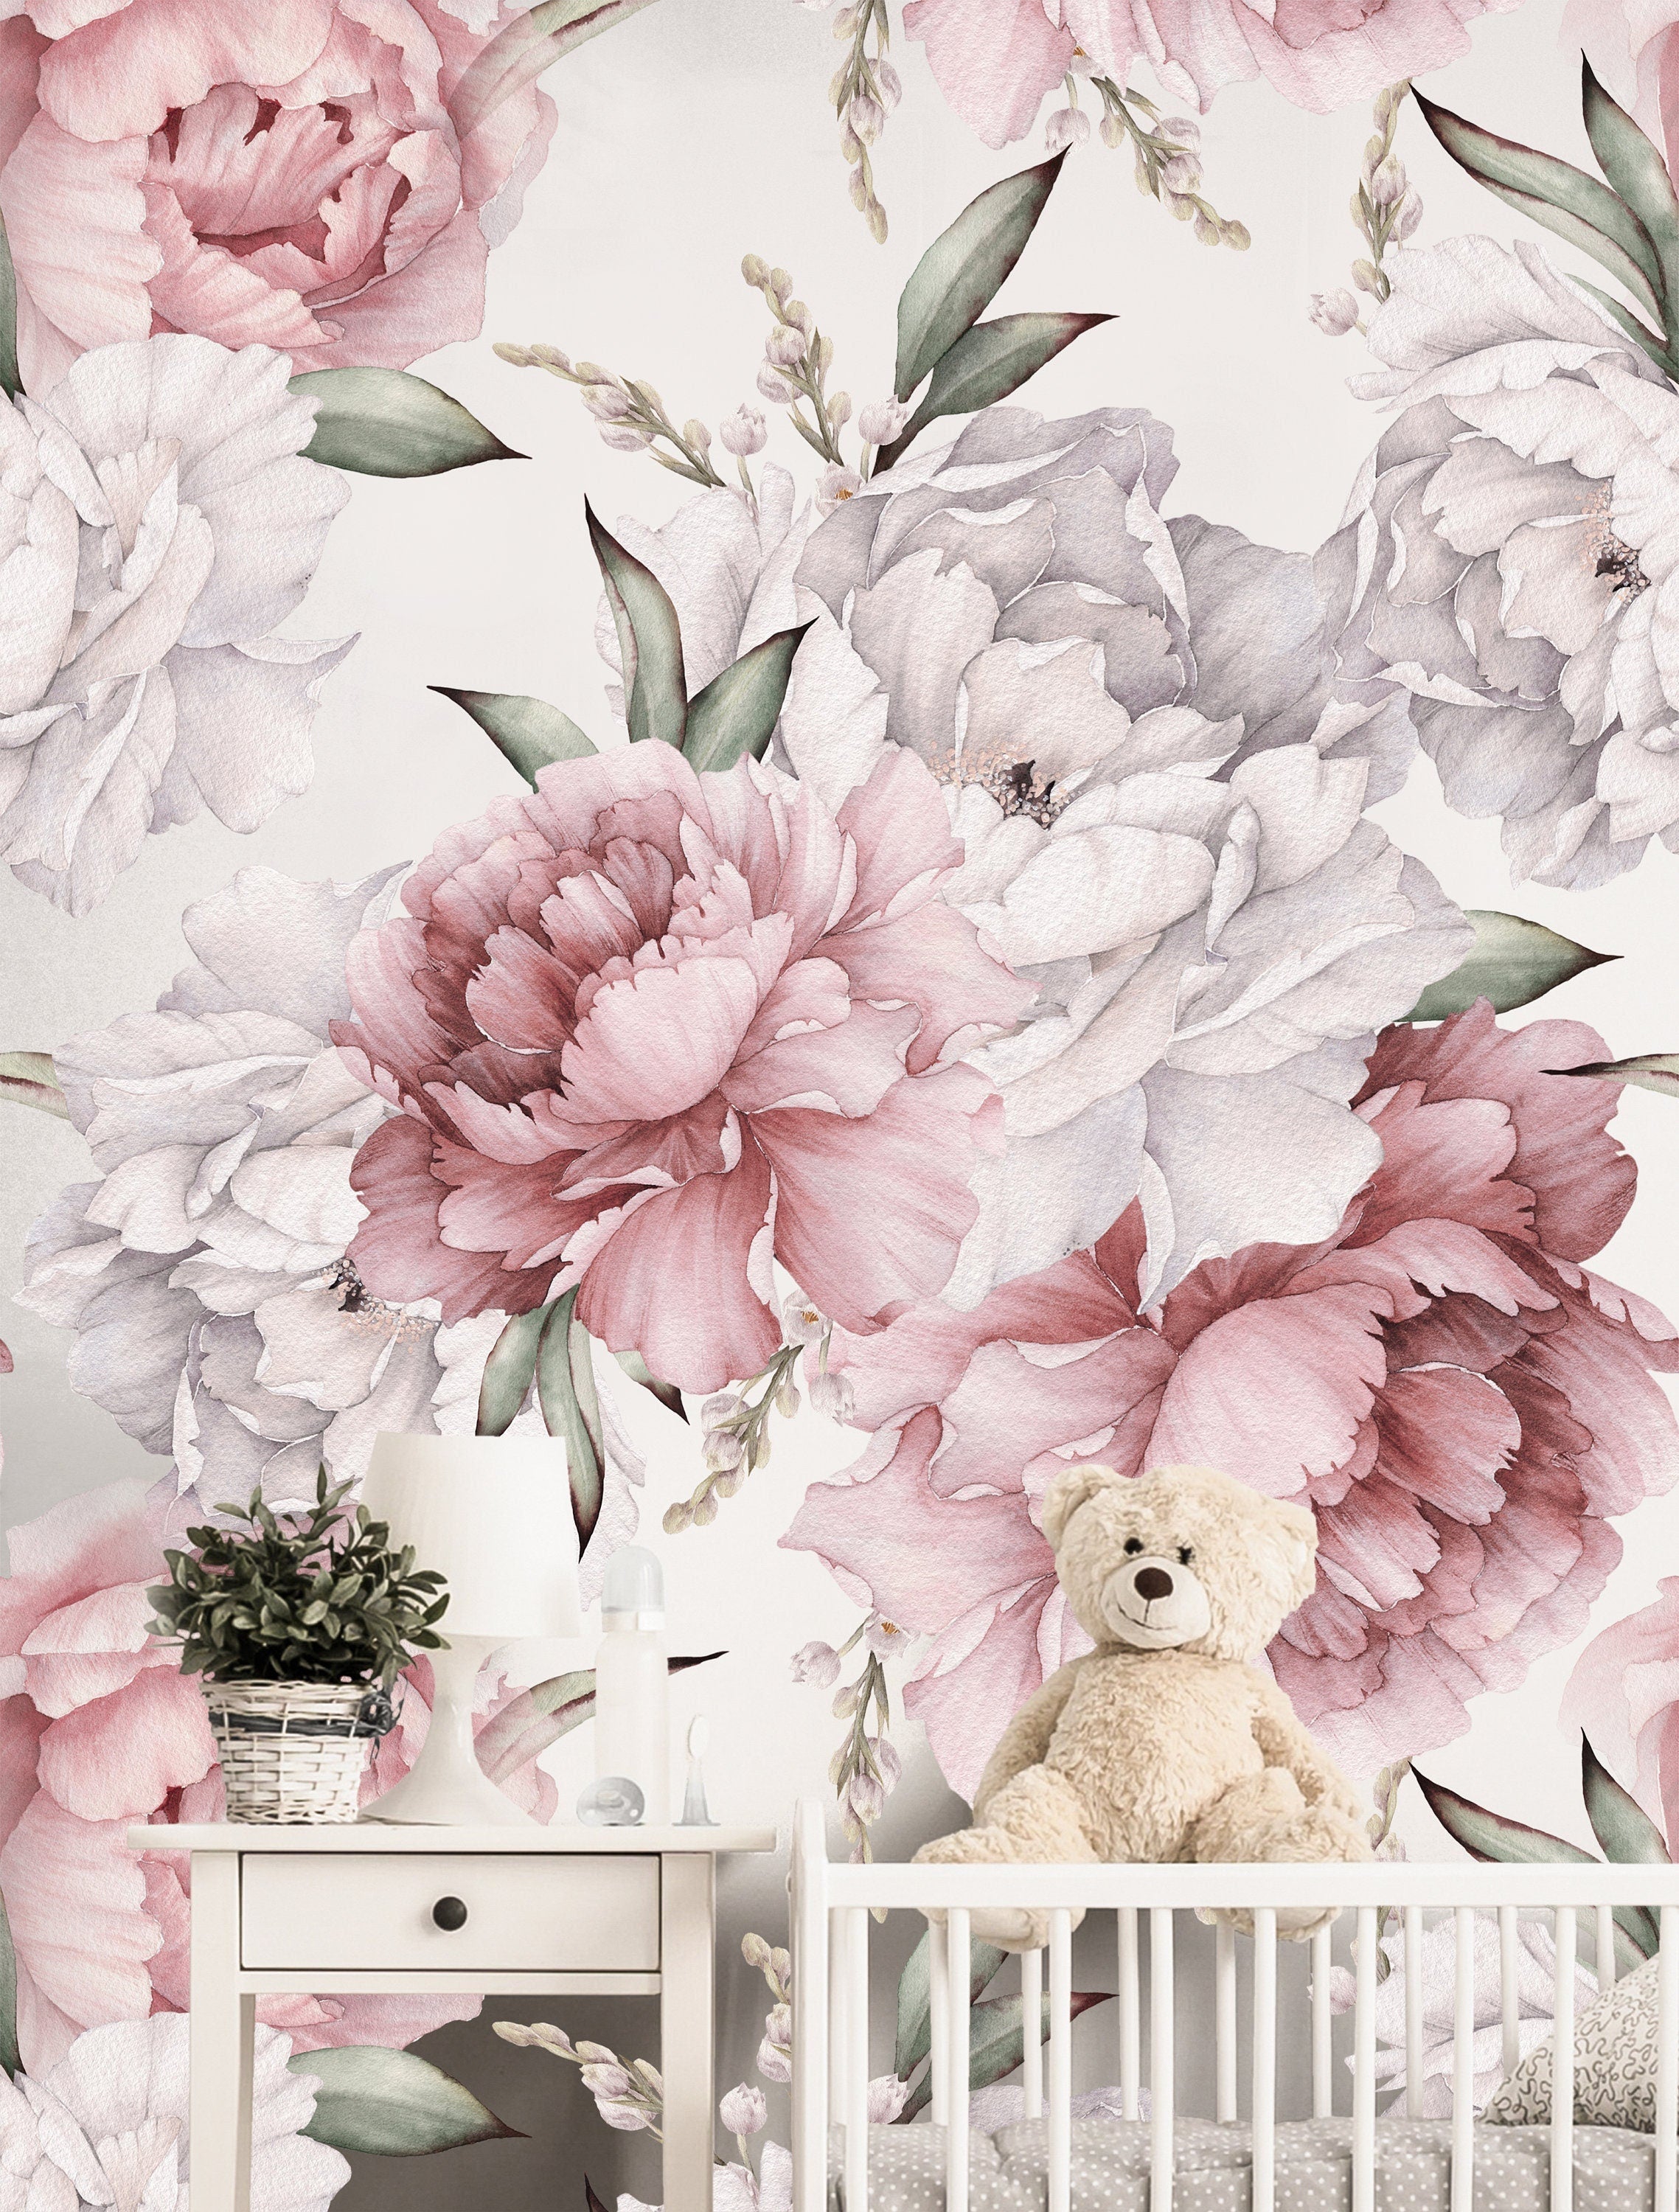 Large Floral Mural Wallpaper | Removable Wallpaper | Peel And Stick Wallpaper | Adhesive Wallpaper | Wall Paper Peel Stick Wall Mural 3667 - JamesAndColors